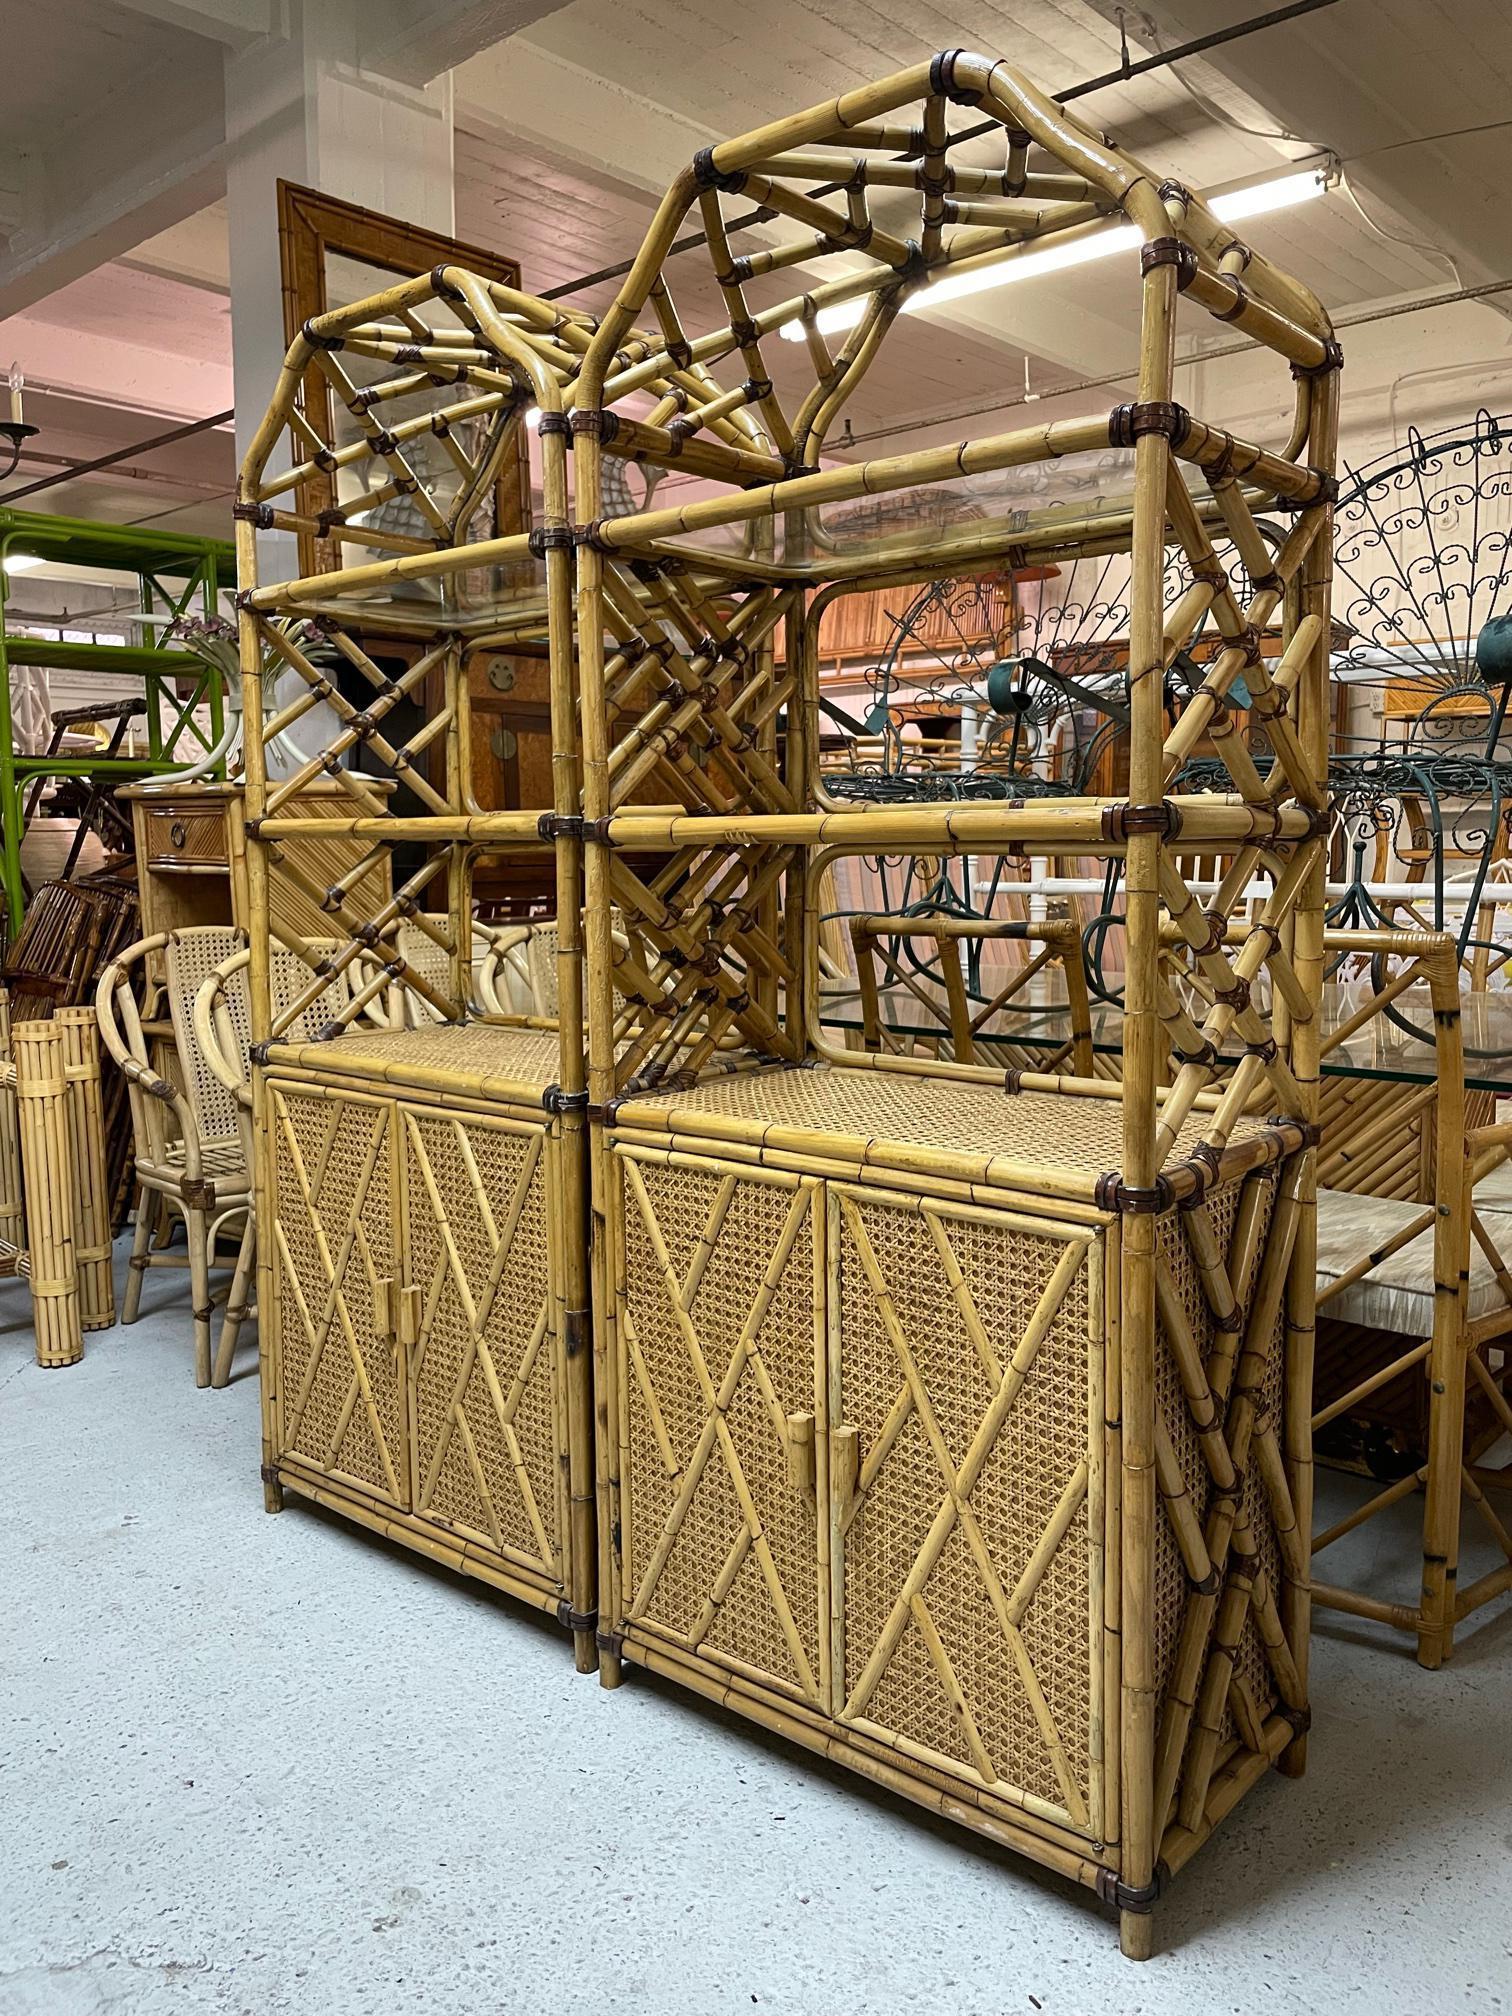 Pair of large rattan etageres feature Chinese chippendale fretwork and cane veneered shelves. Beautiful chinoiserie style pagoda tops and glass shelving. Contrasting leather strapping. One unit has a large open 2-space storage area behind double